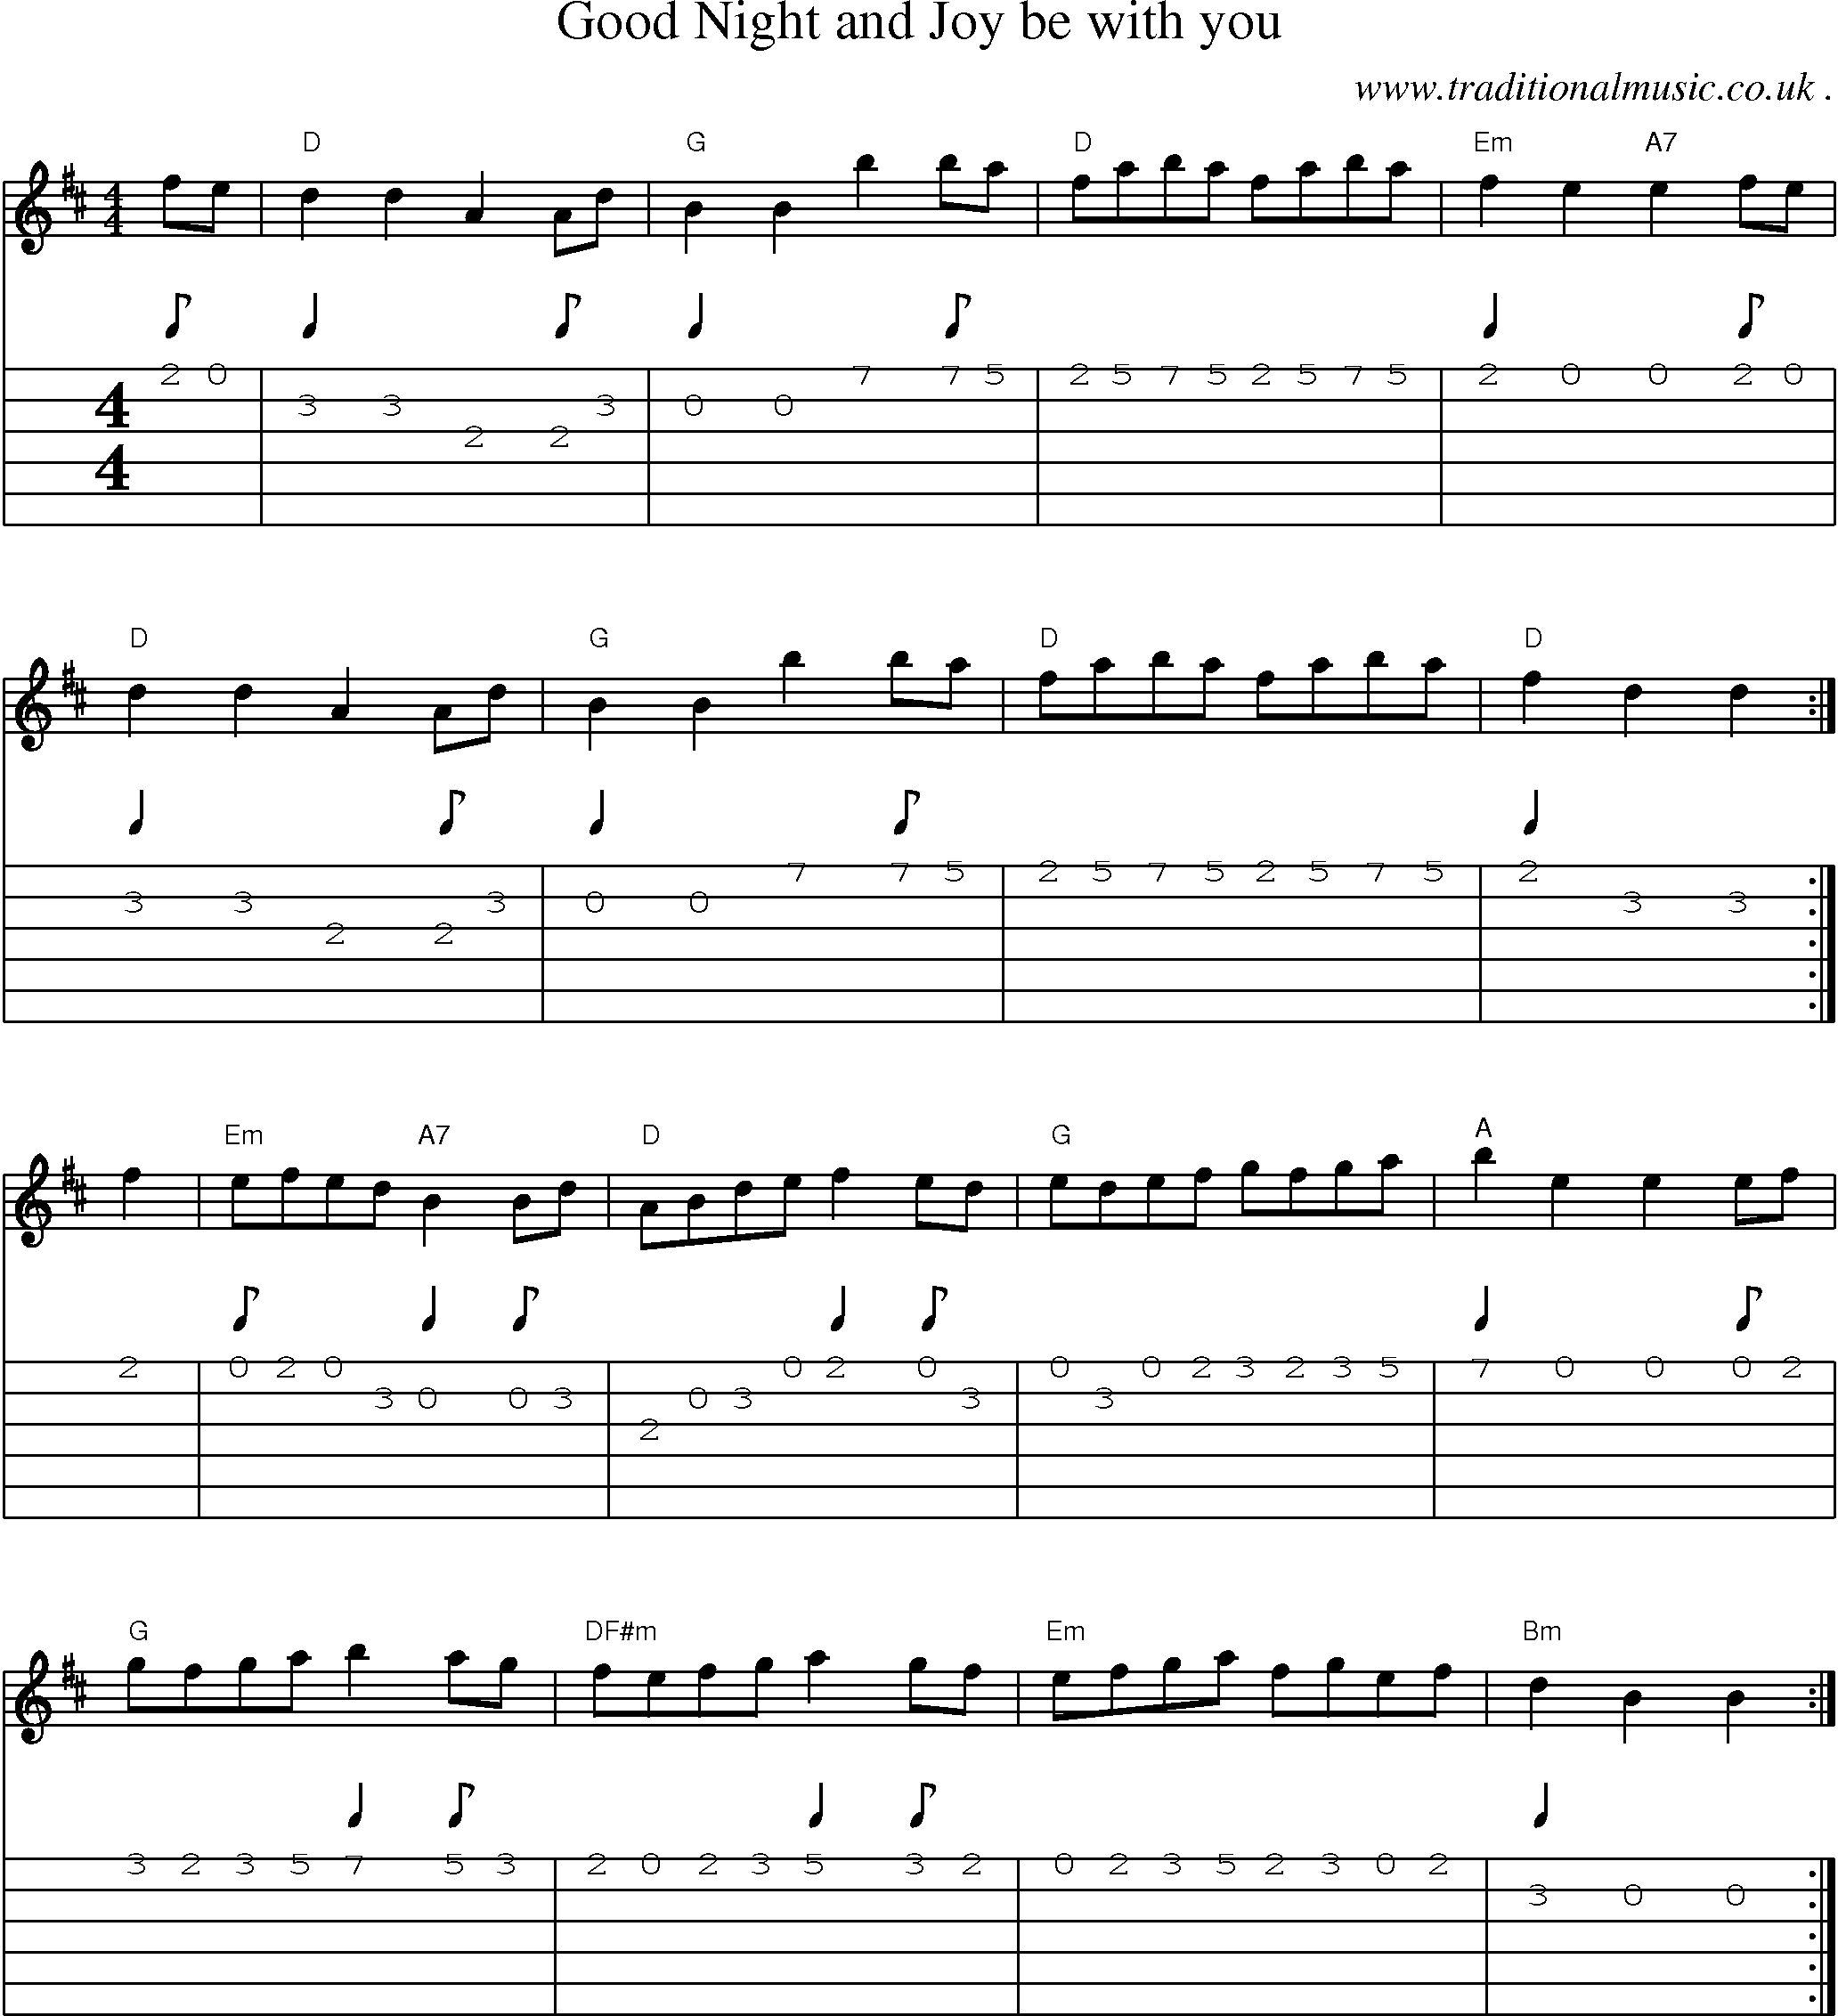 Sheet-Music and Guitar Tabs for Good Night And Joy Be With You